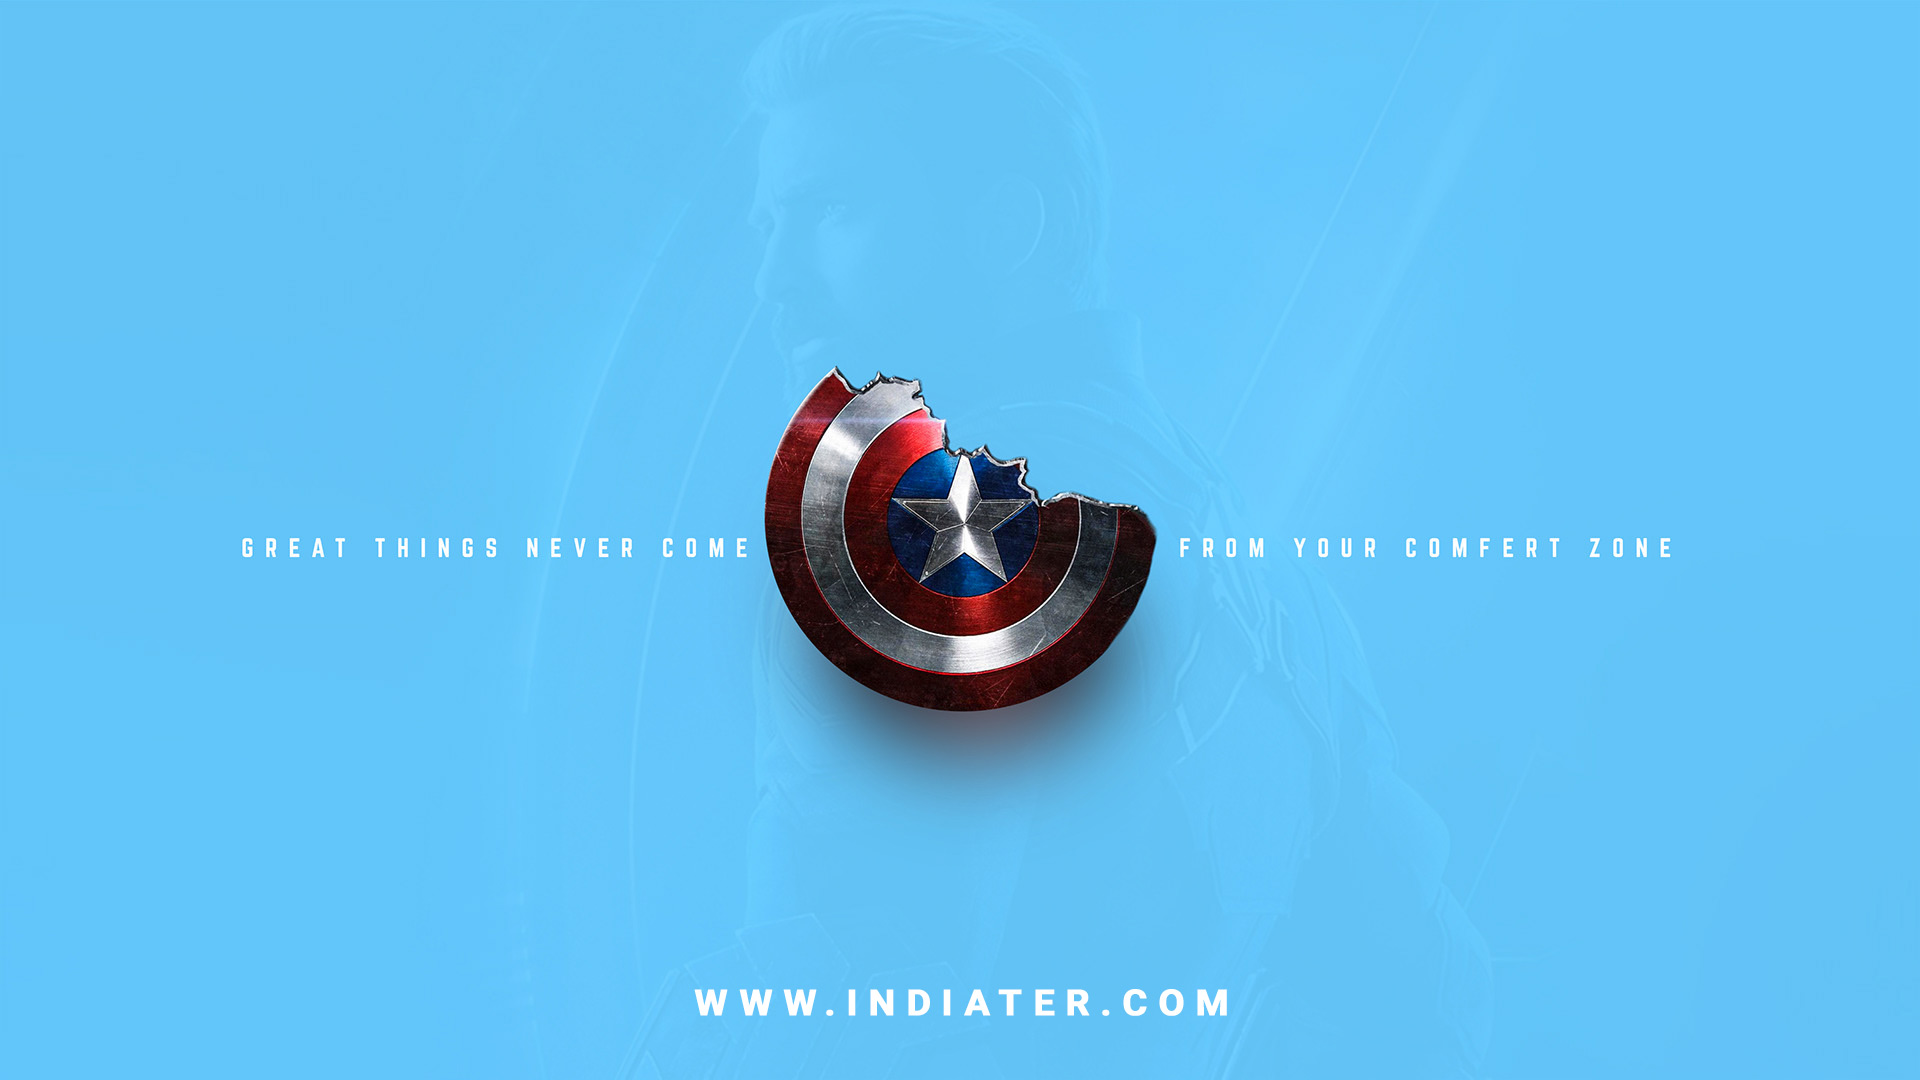 4 Different Color Captain America Shield Wallpaper with Positive Quotes  Adobe Photoshop Background Designs Free Download - Indiater